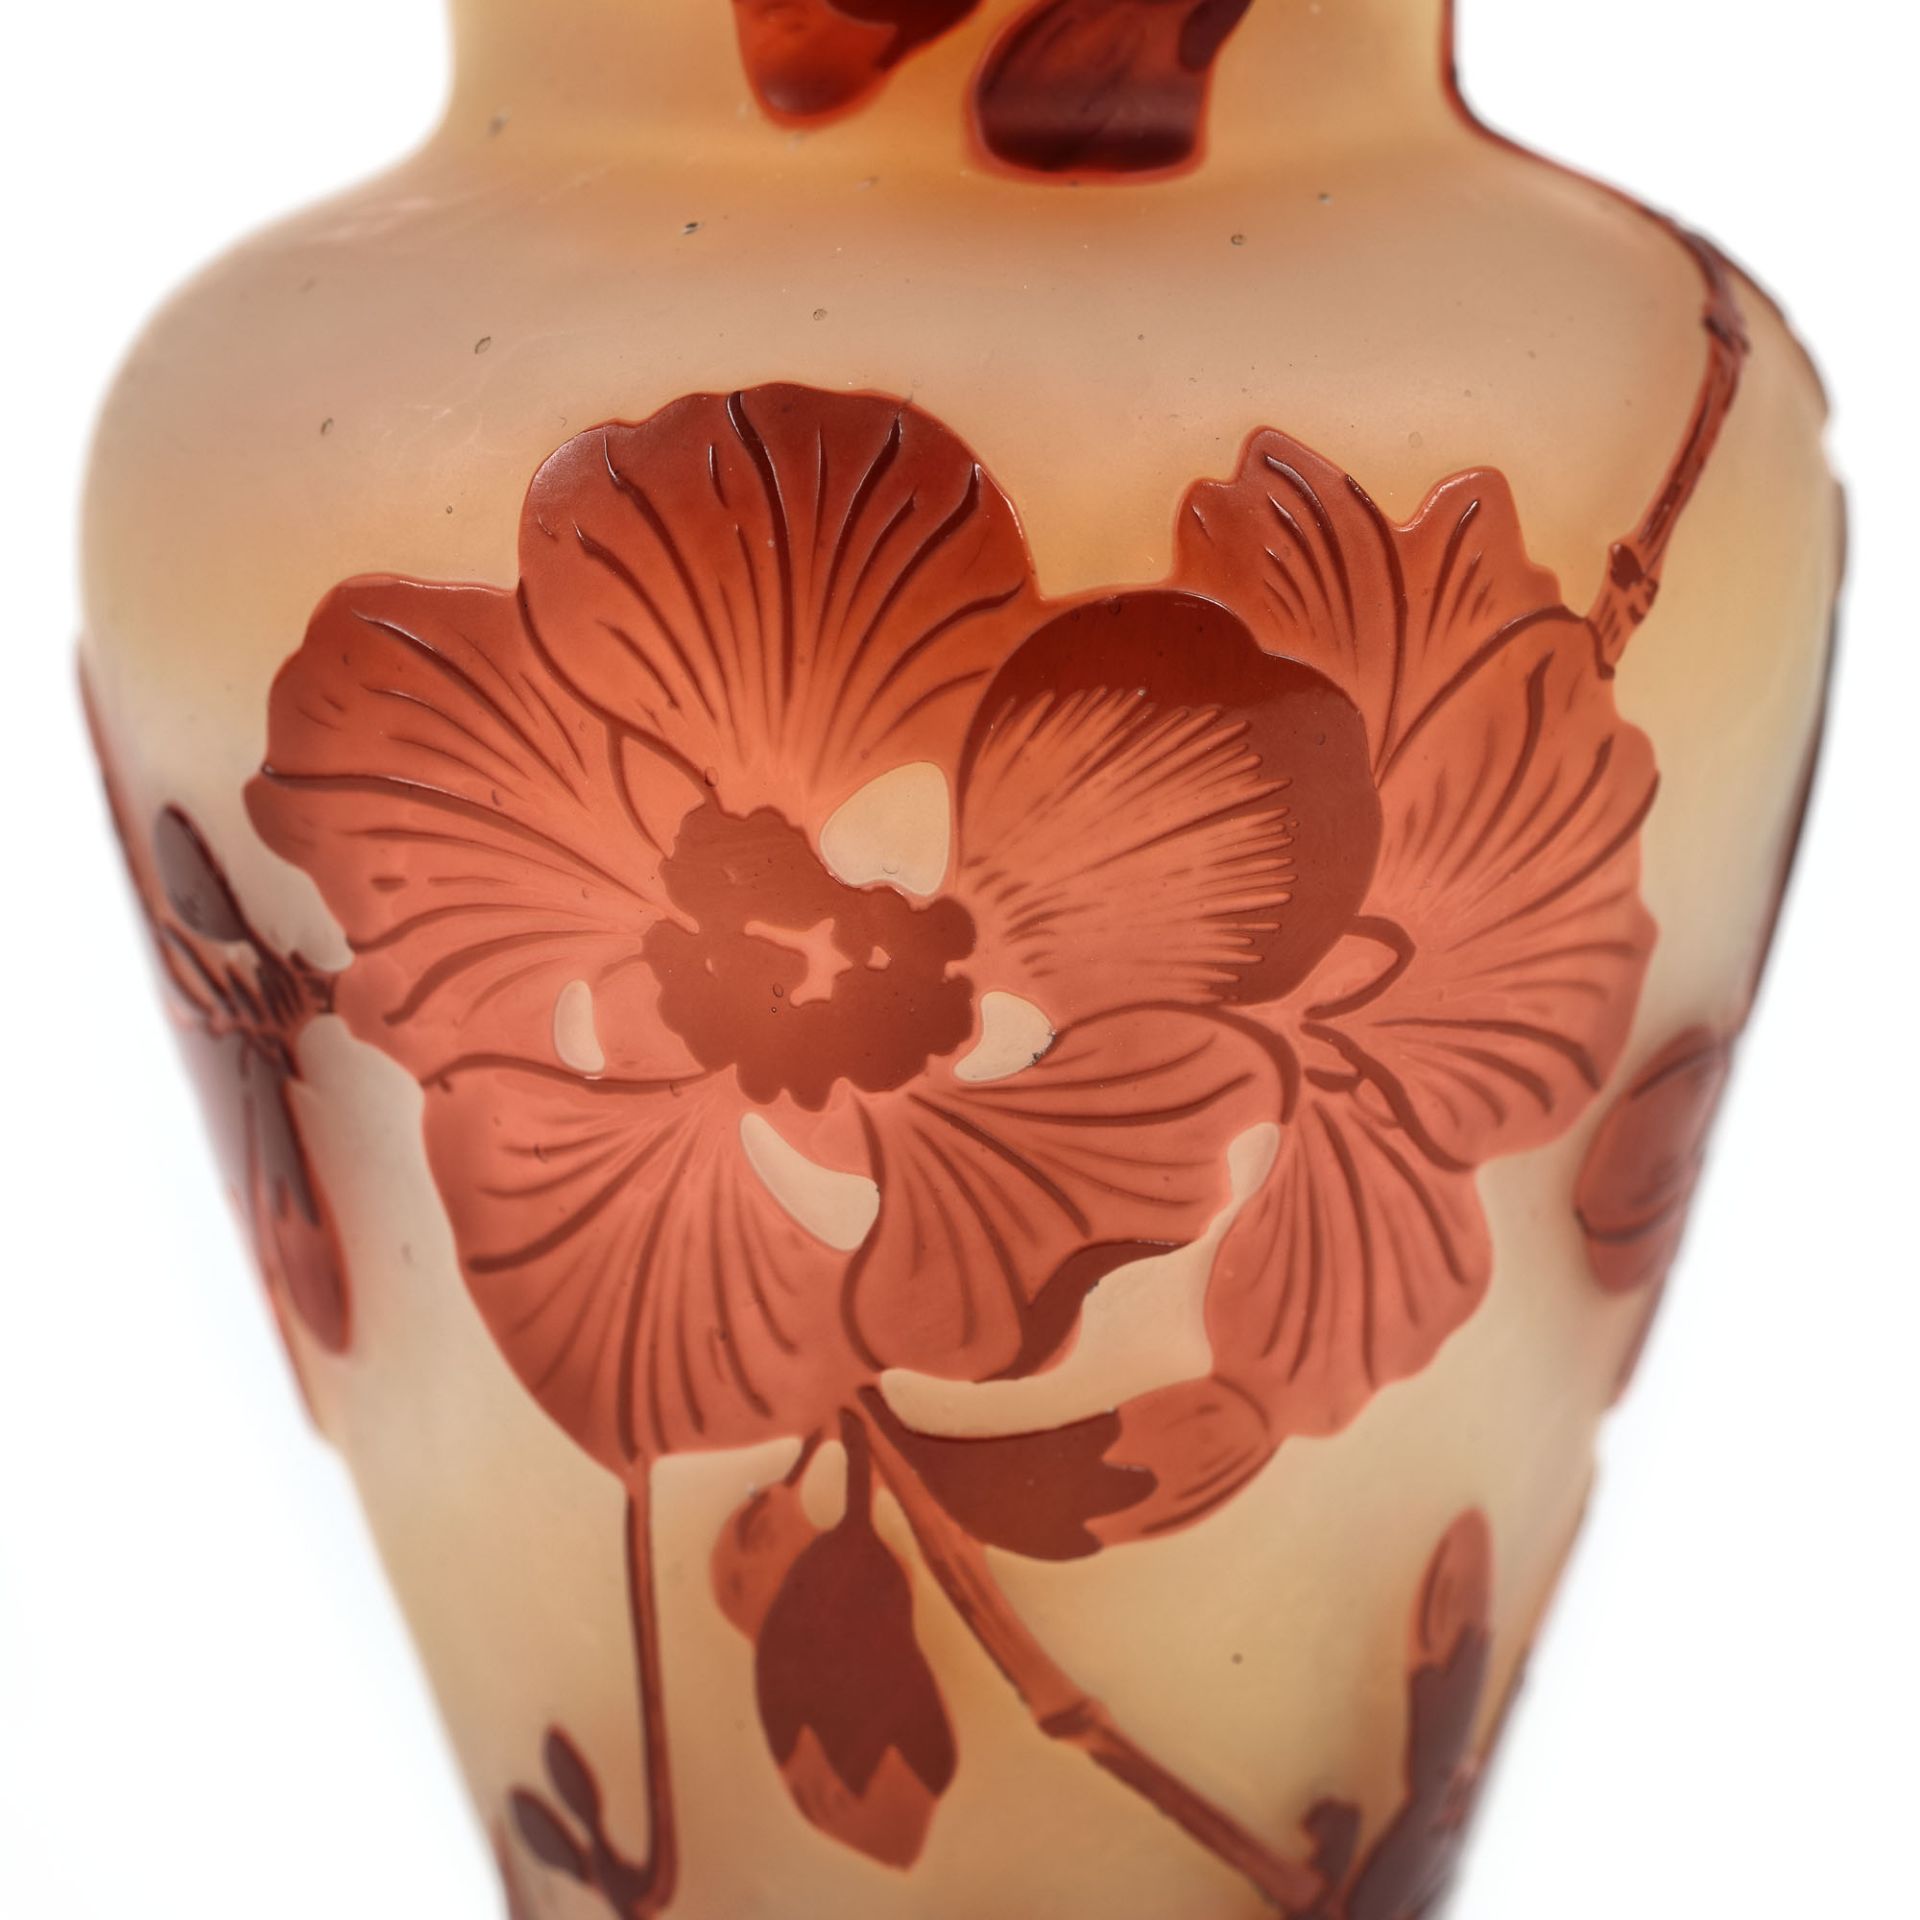 French workshop, Gallé vase, decorated with apple blossoms, in orange and yellow tones, approx. 1914 - Image 6 of 6